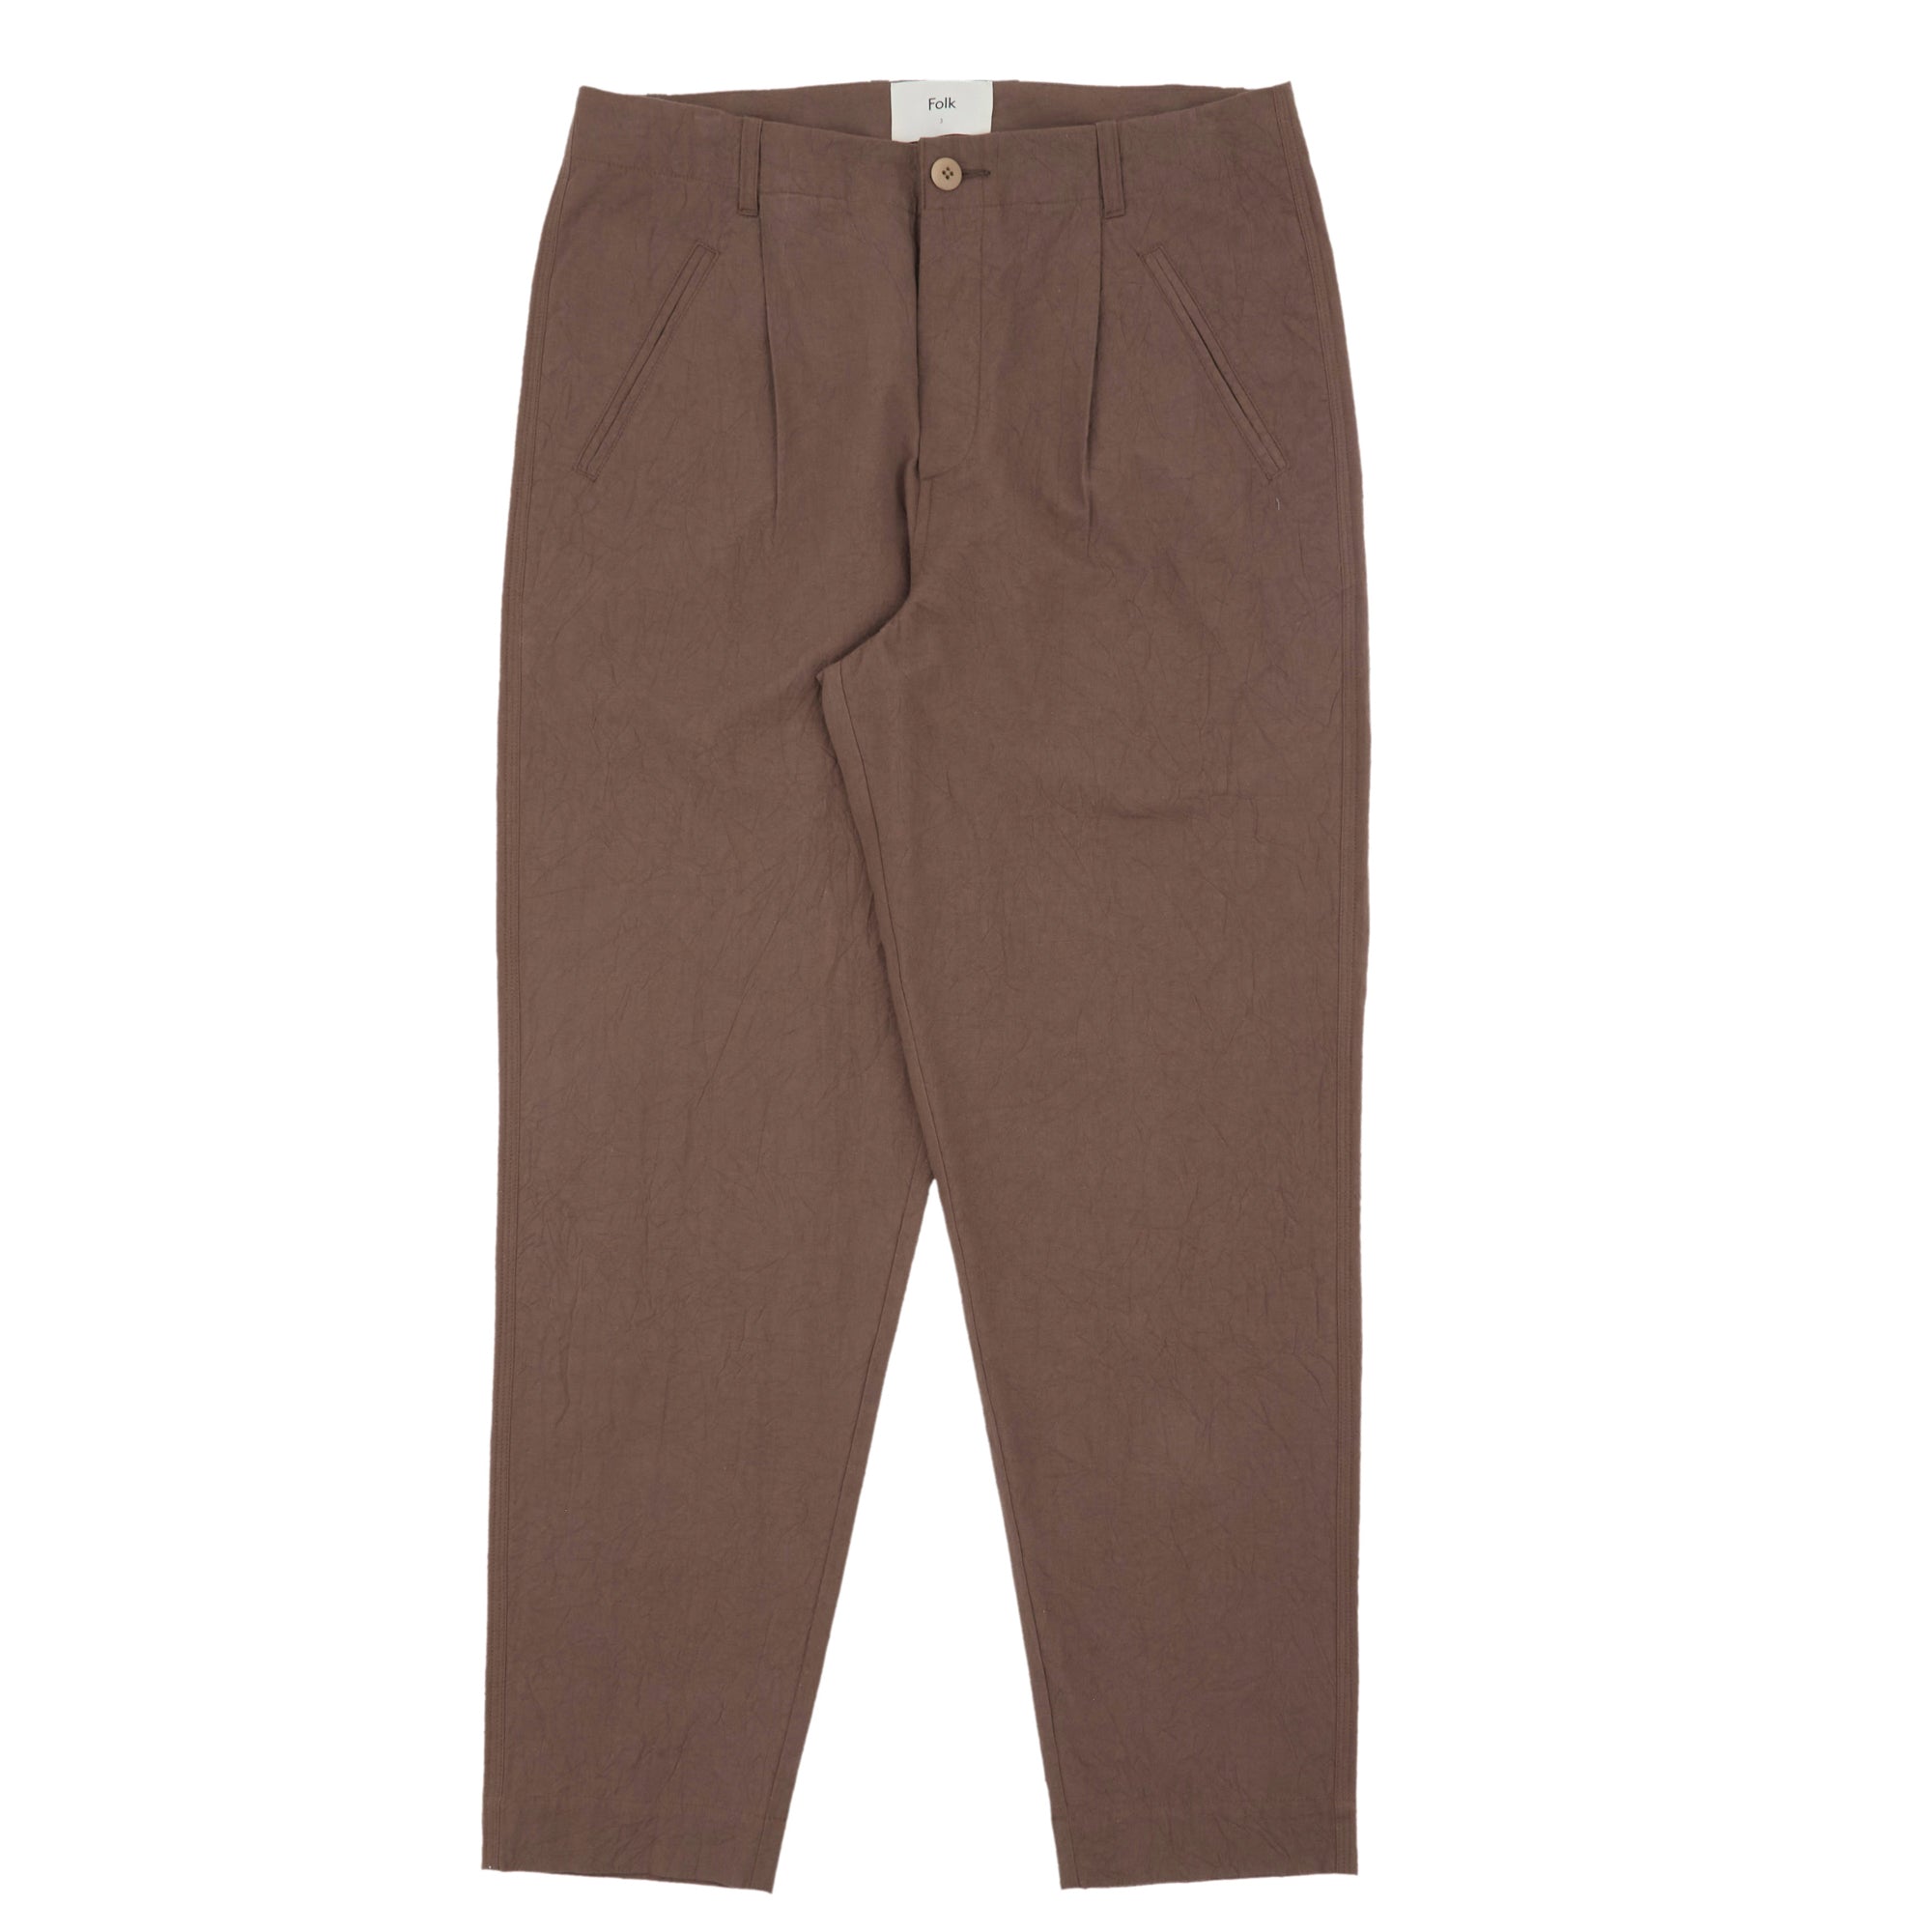 Assembly Pants - Ash Brown Crinkle